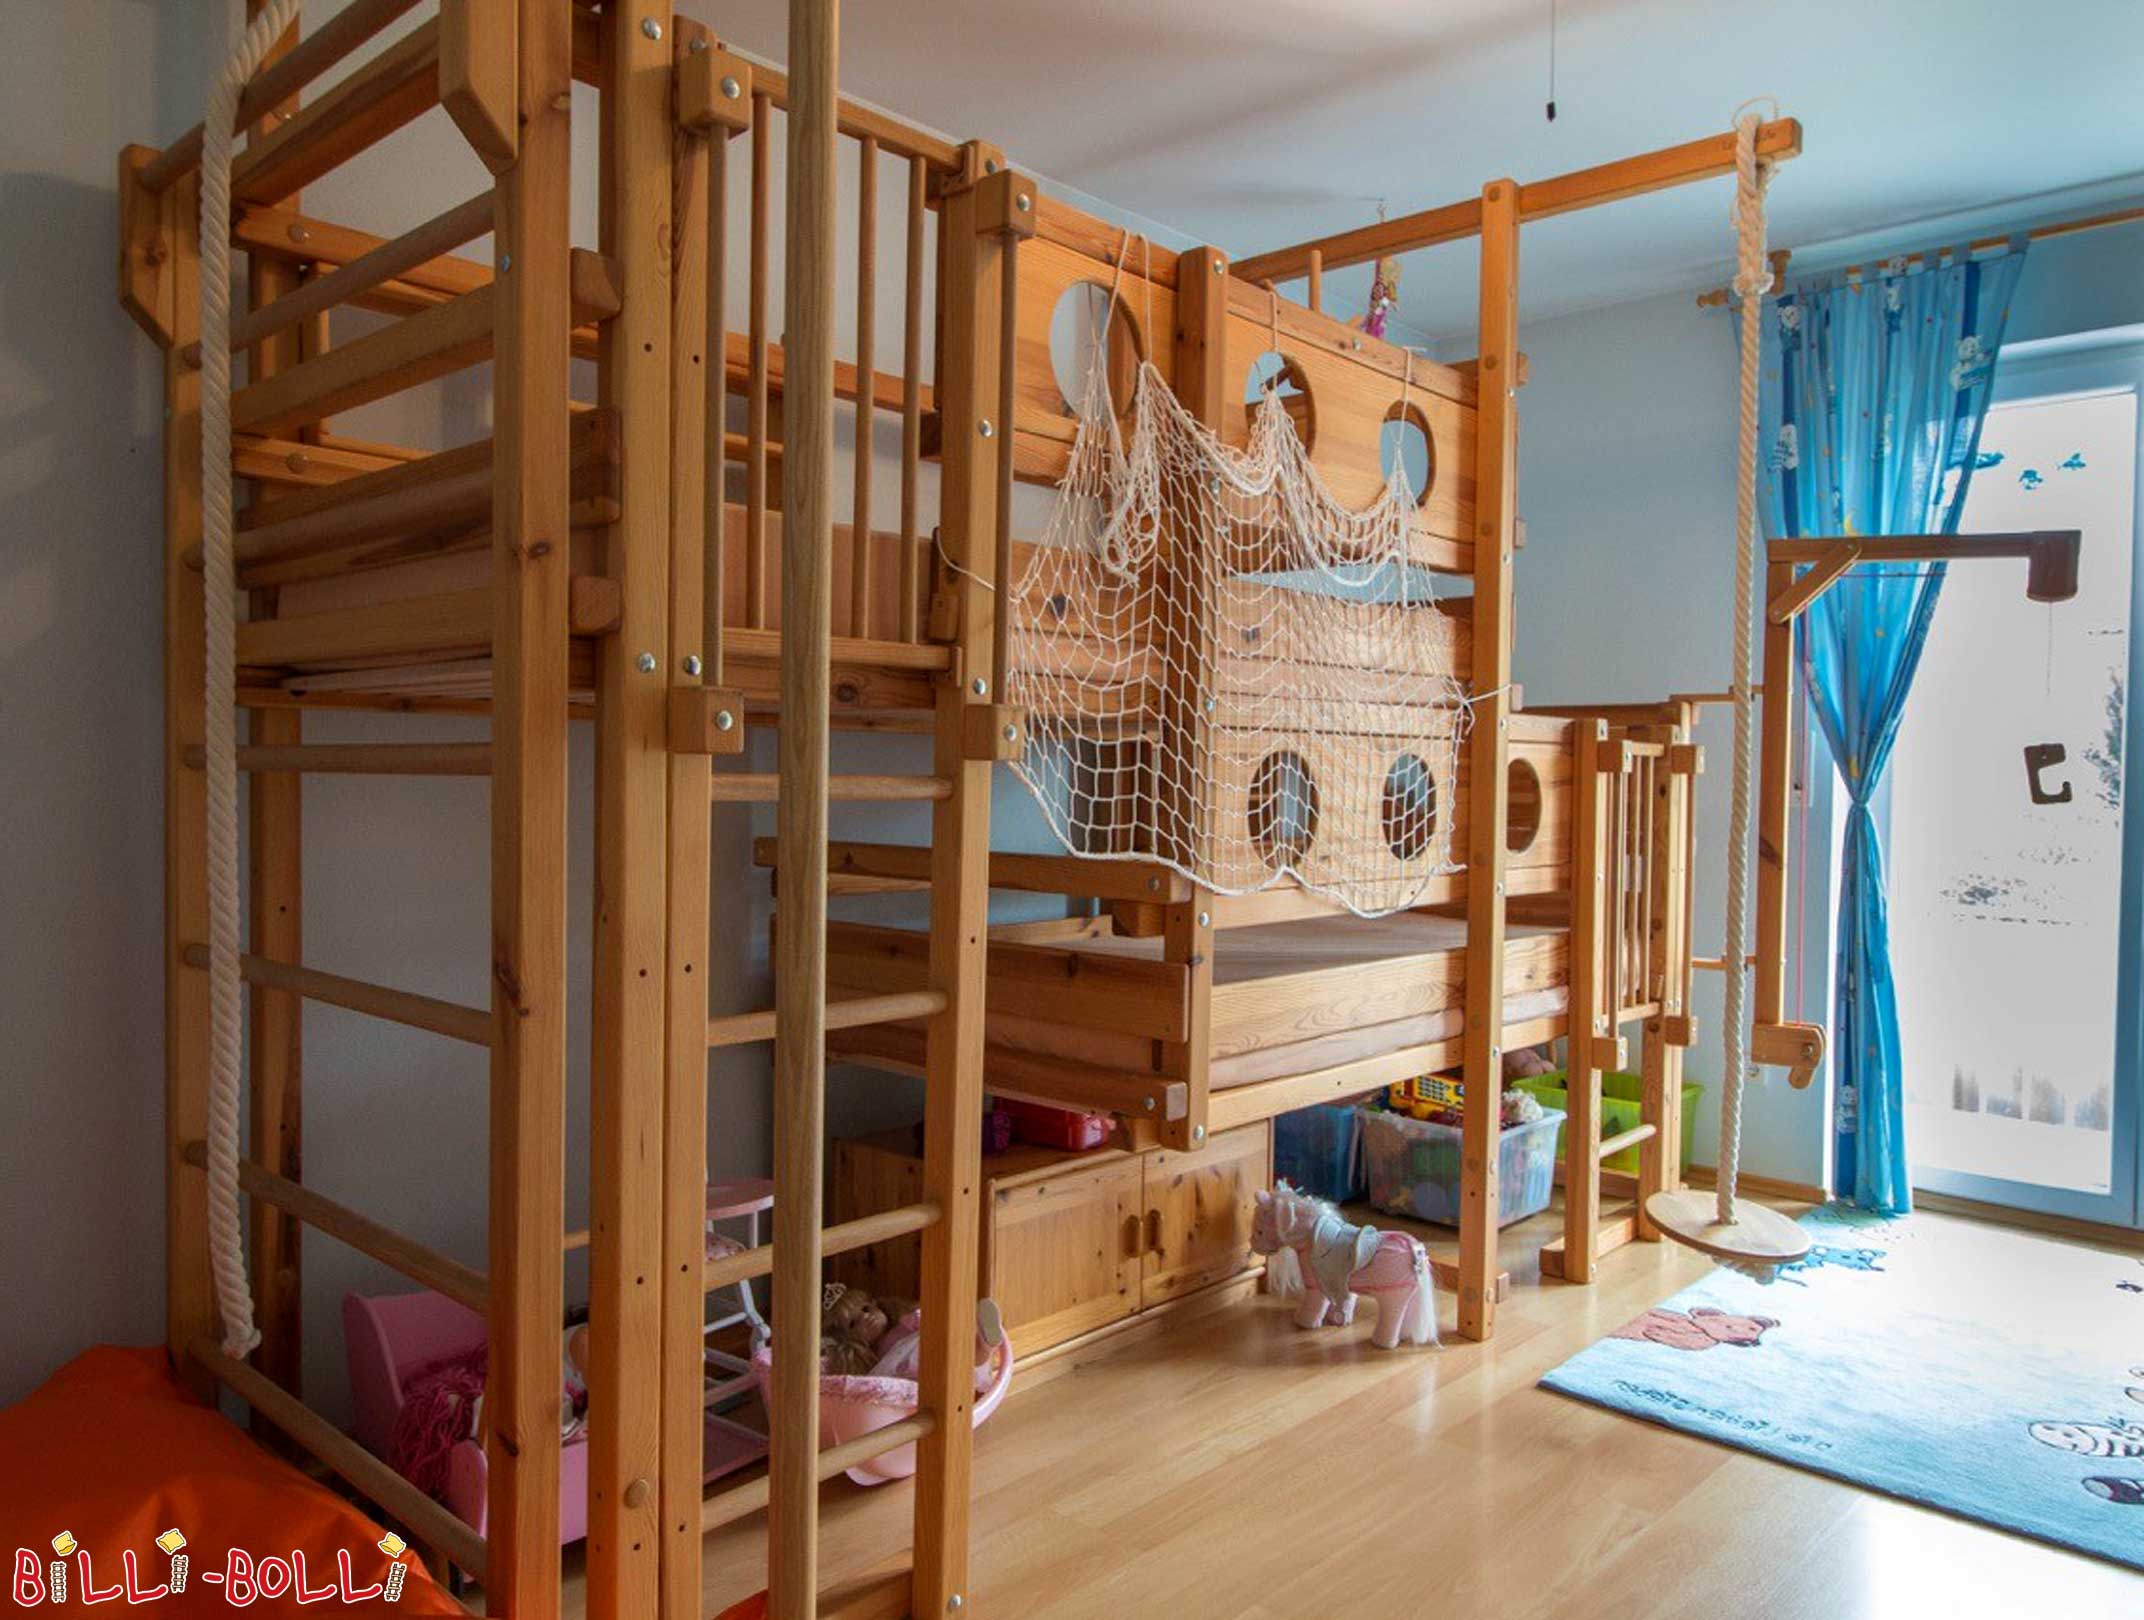 Double loft beds made of wood: The double-top bunk bed is a double bunk bed for 2 children (Both-Up Bunk Beds)